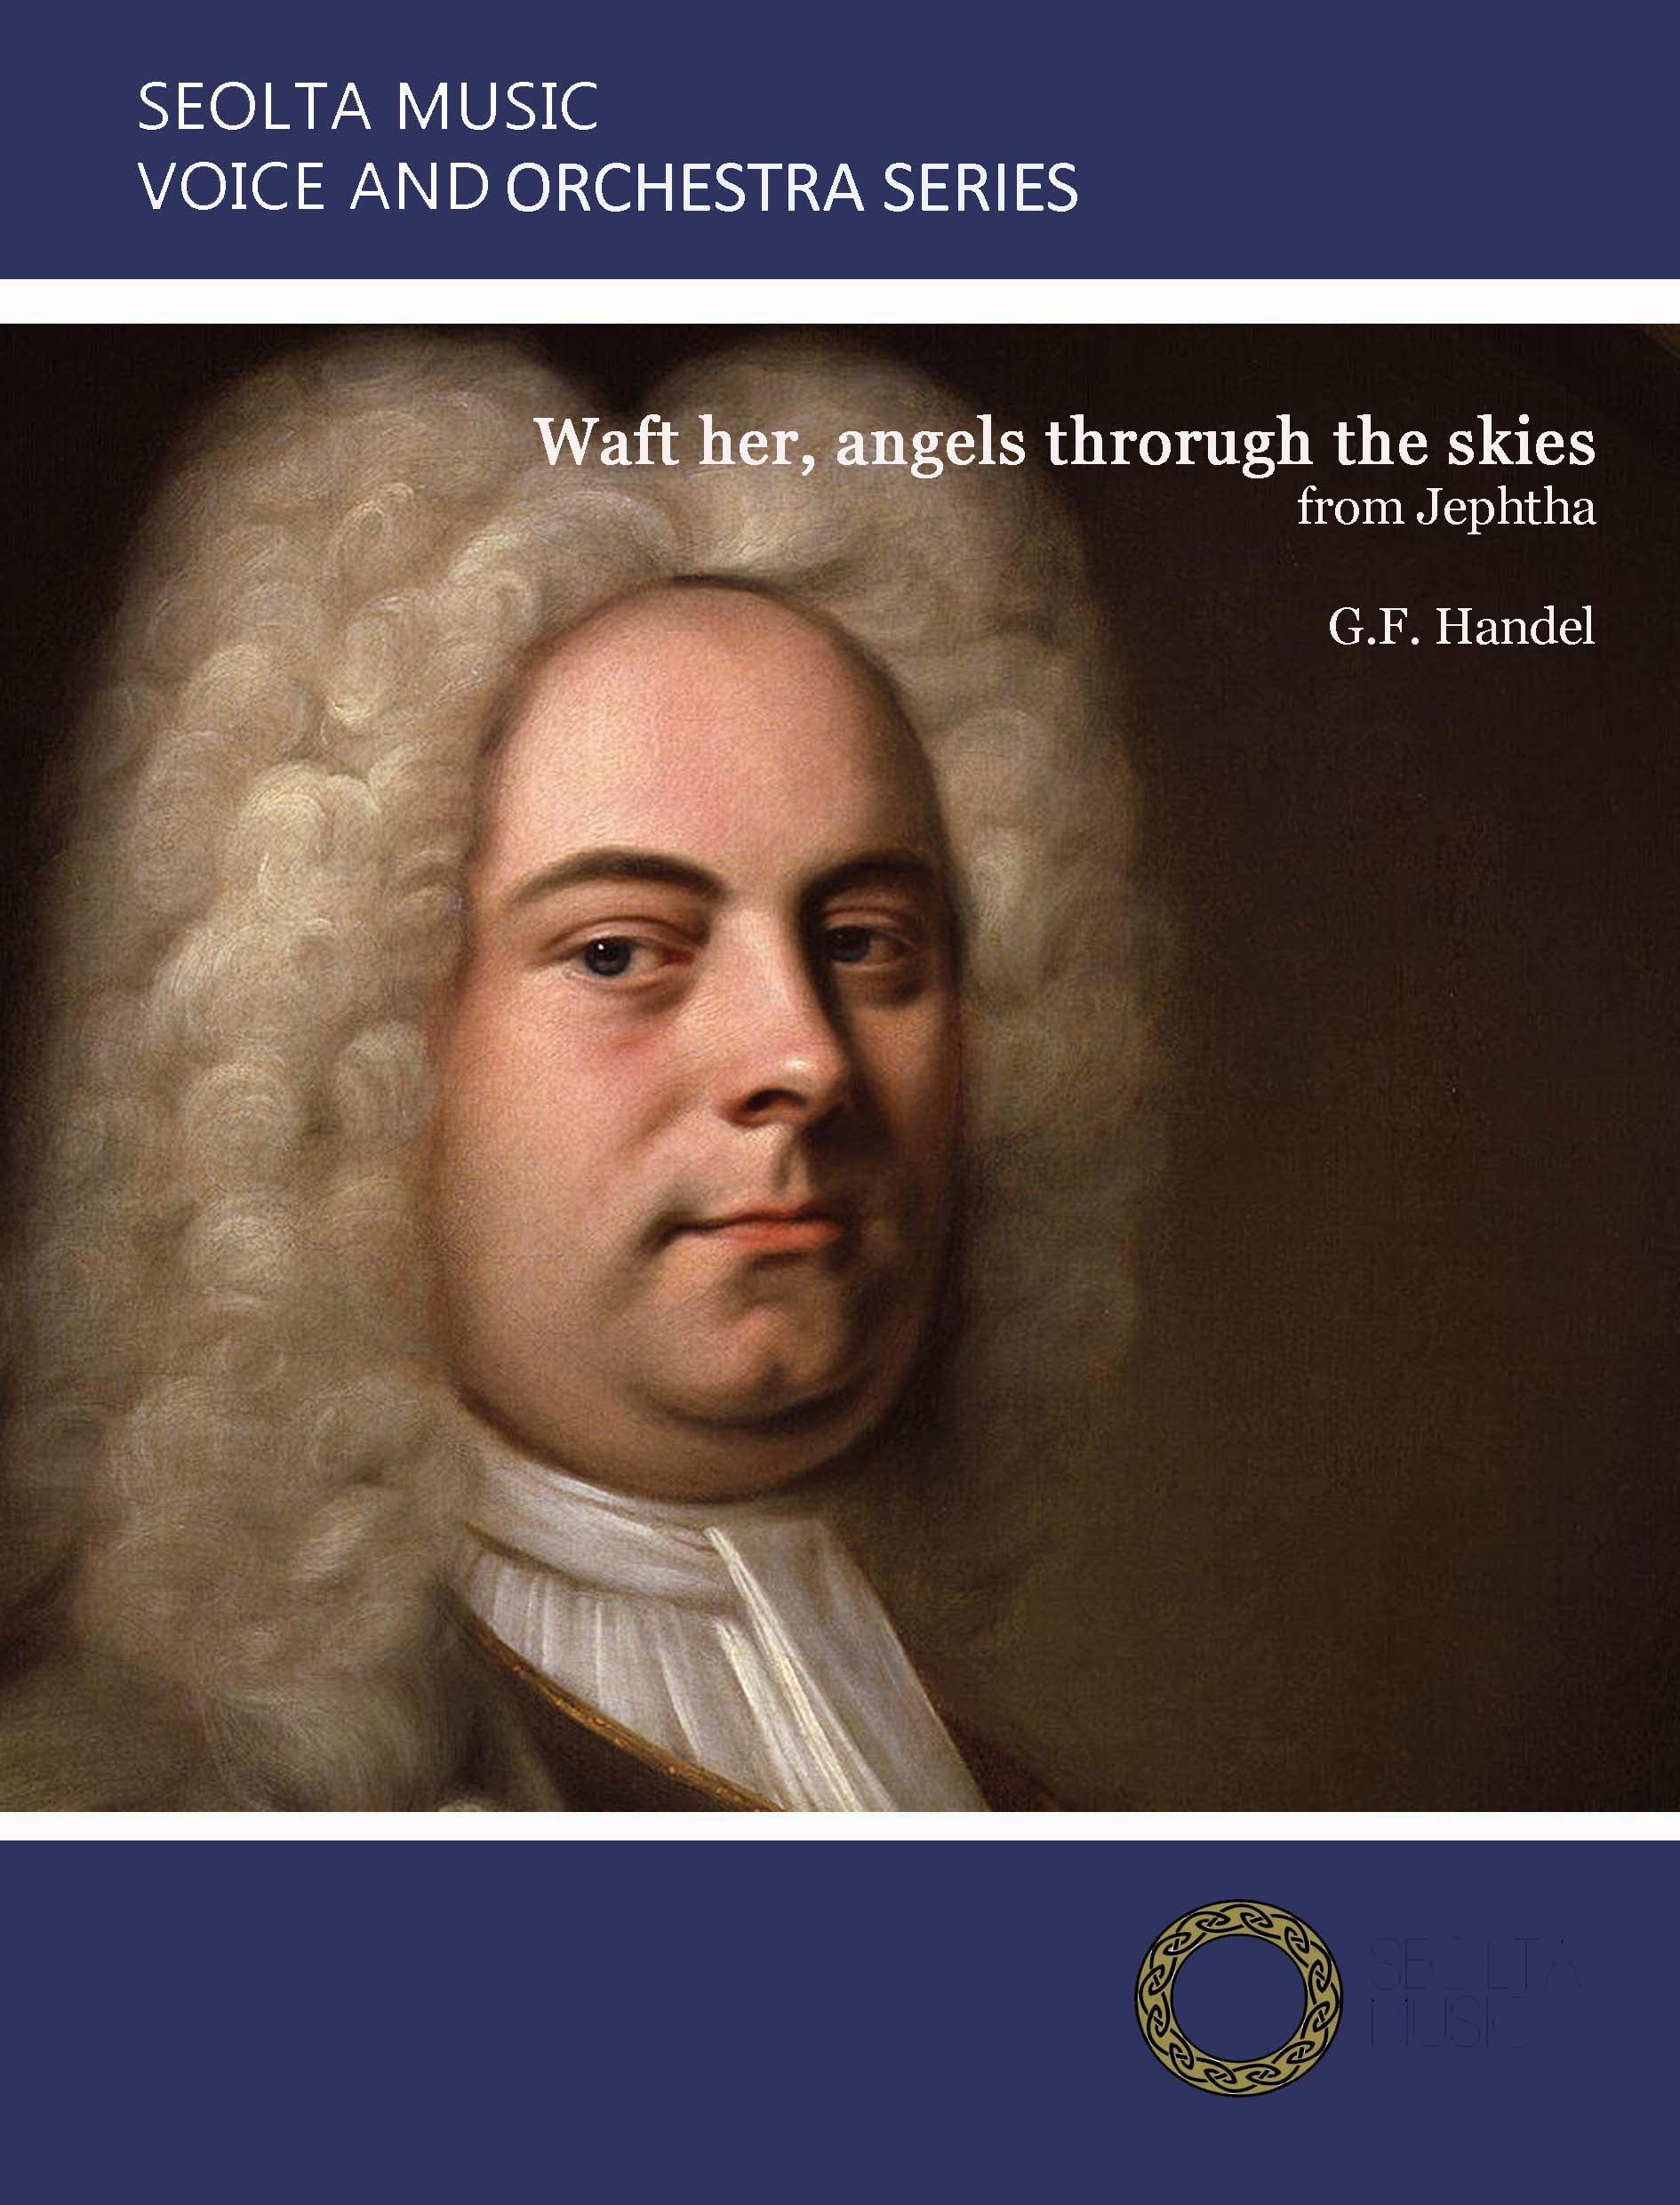 waft-her-angels-through-the-skies-from-jephtha-g-f-handel